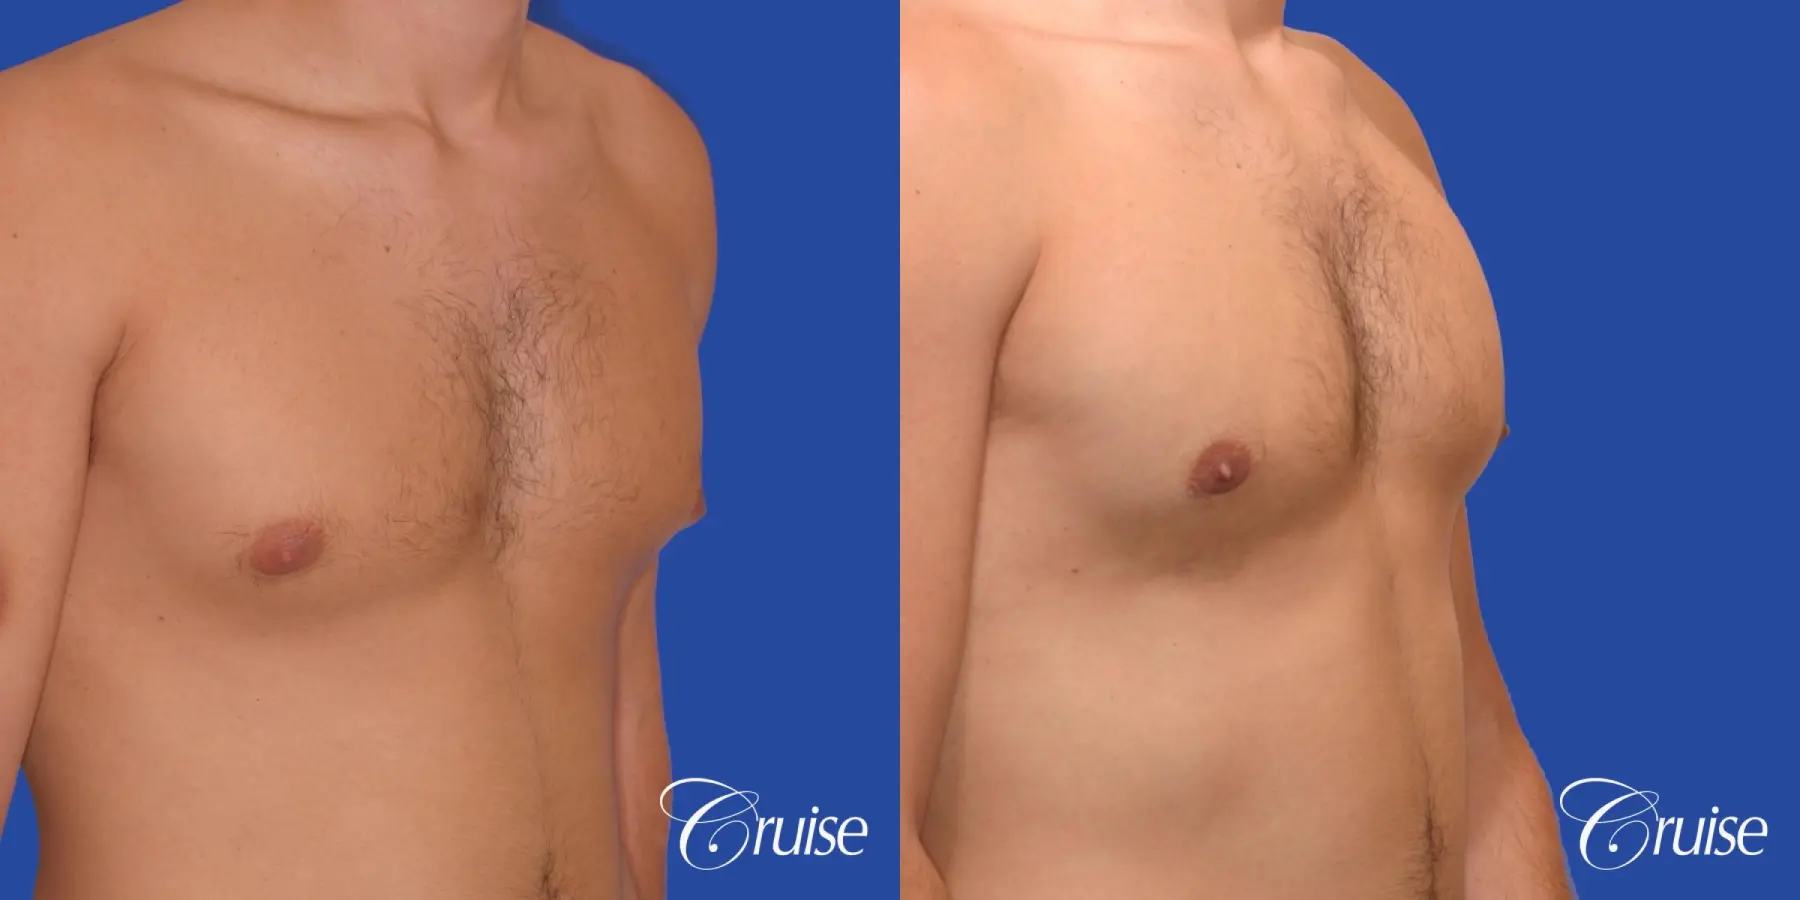 24 yr old body builder mild gynecomastia - Before and After 3